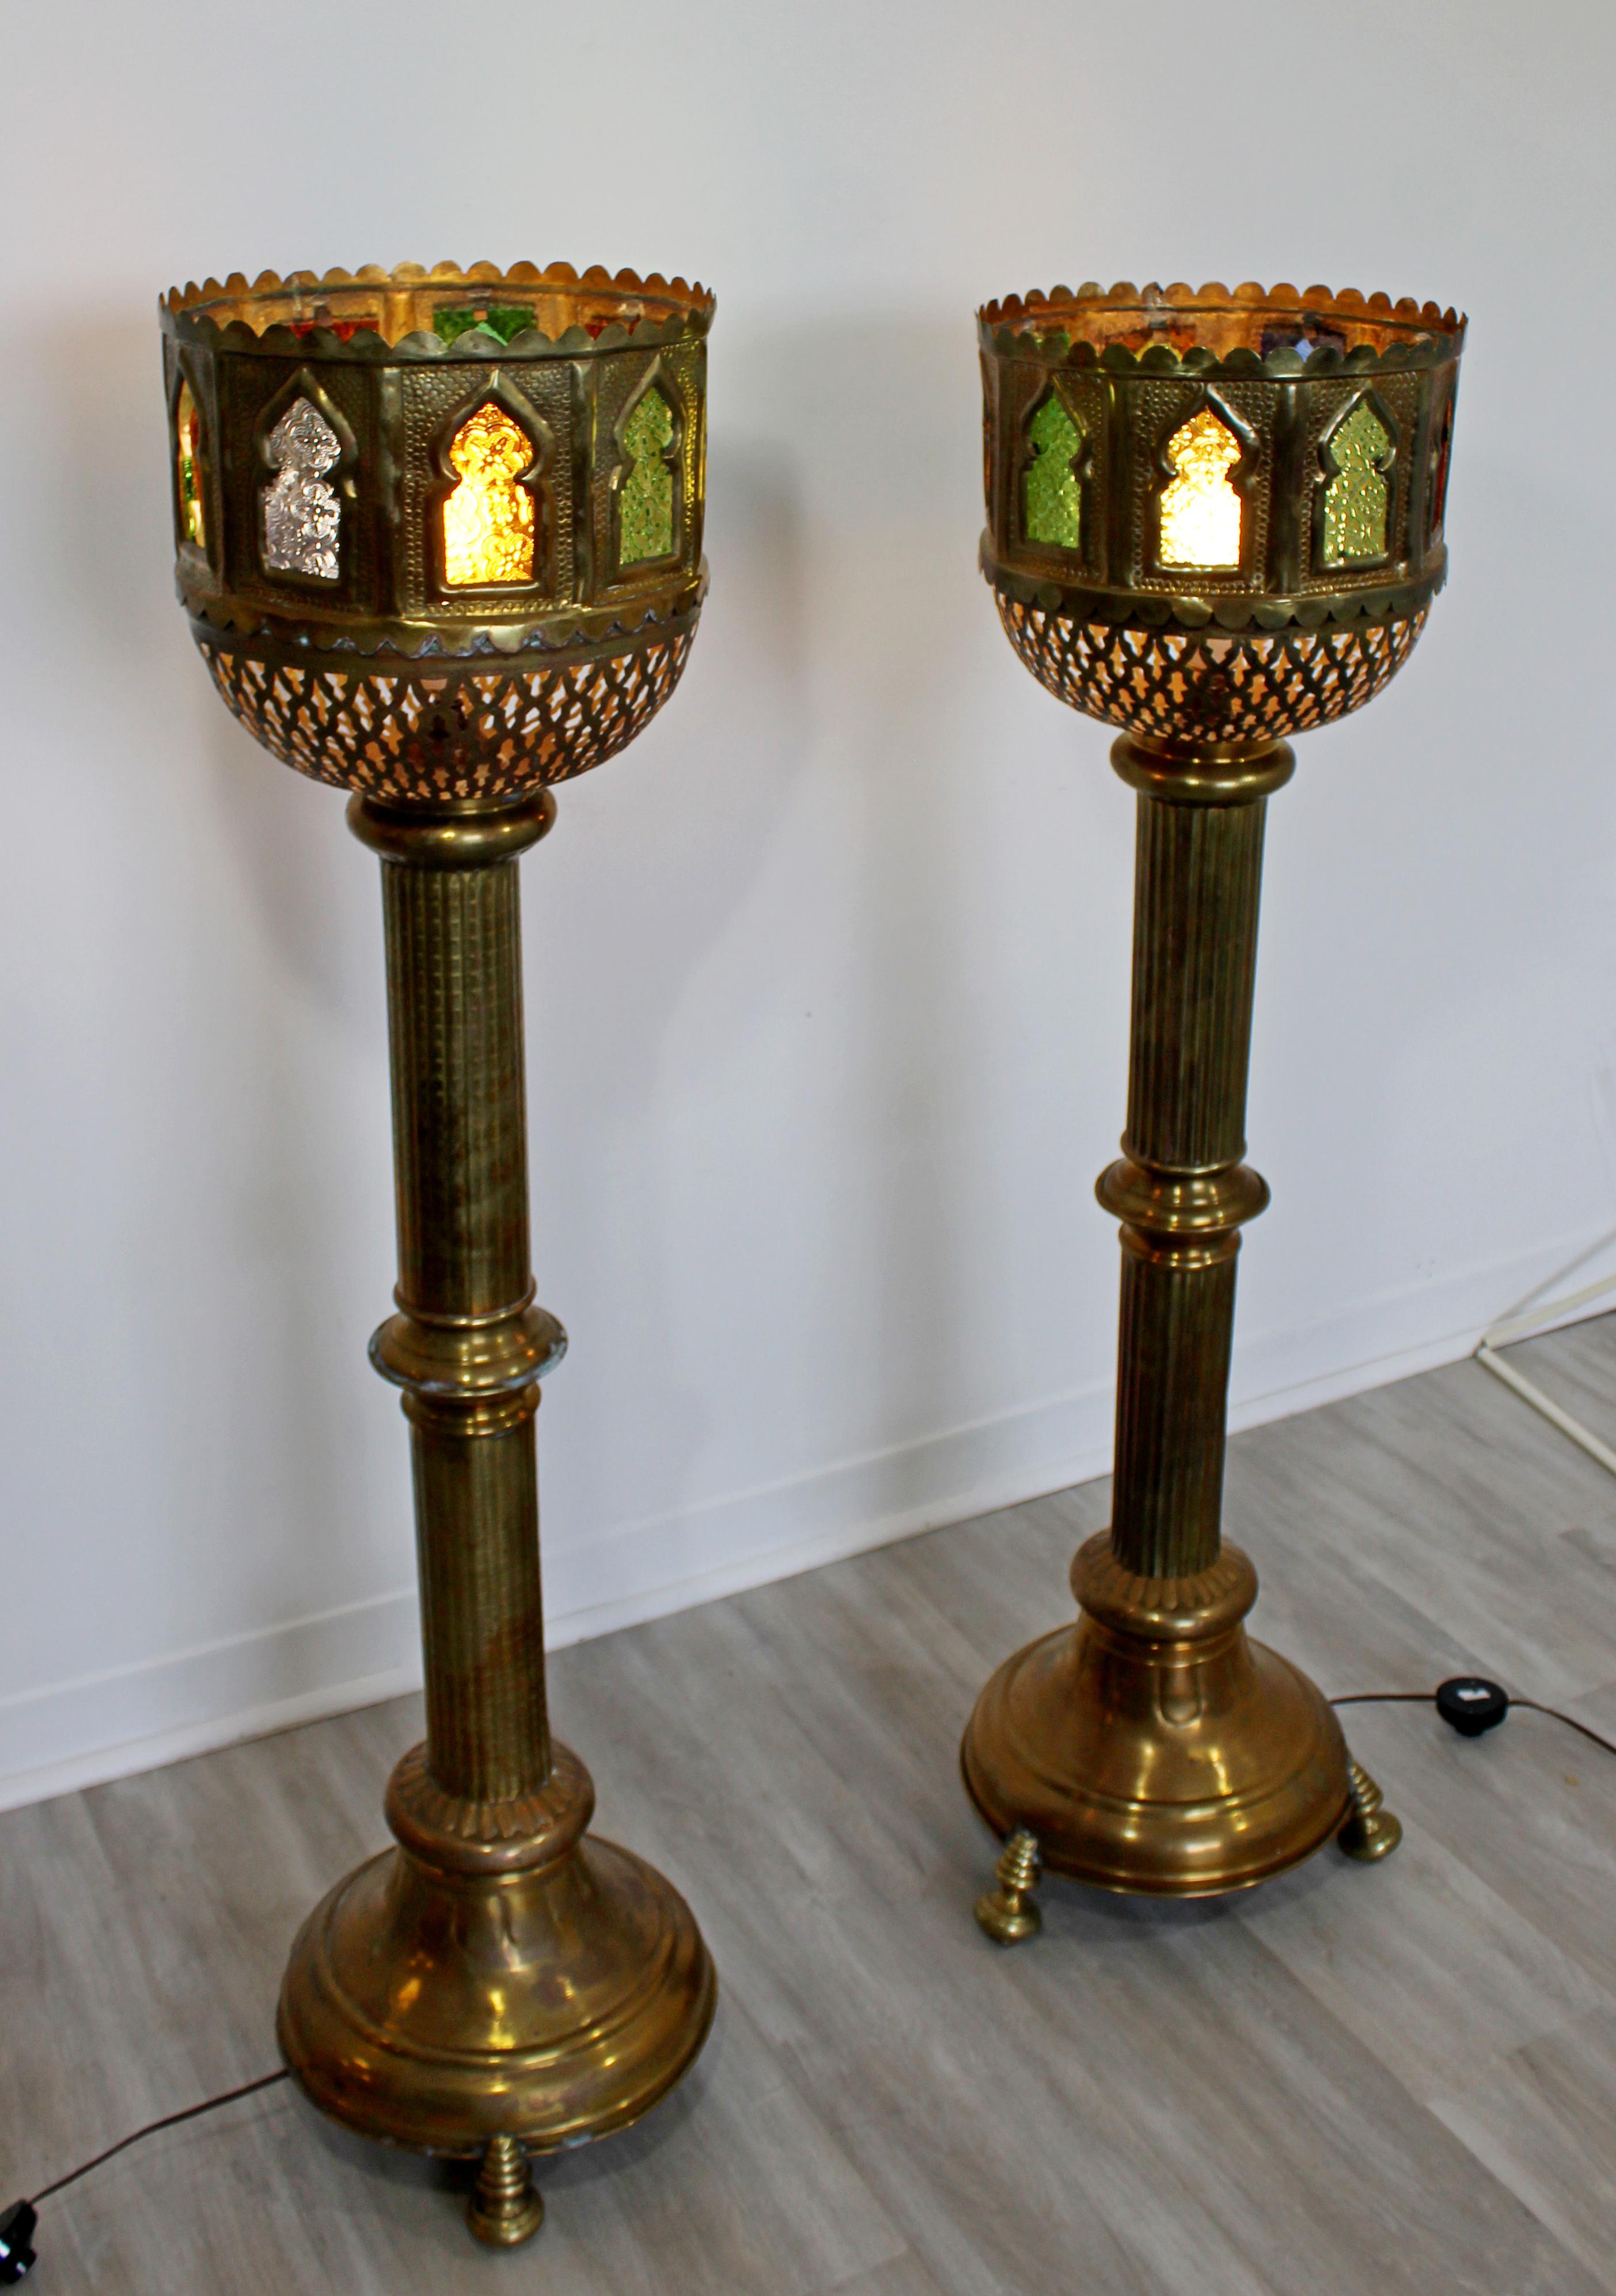 For your consideration is a beautiful pair of Bohemian, brass floor lamps. In very good condition. The dimensions are 12